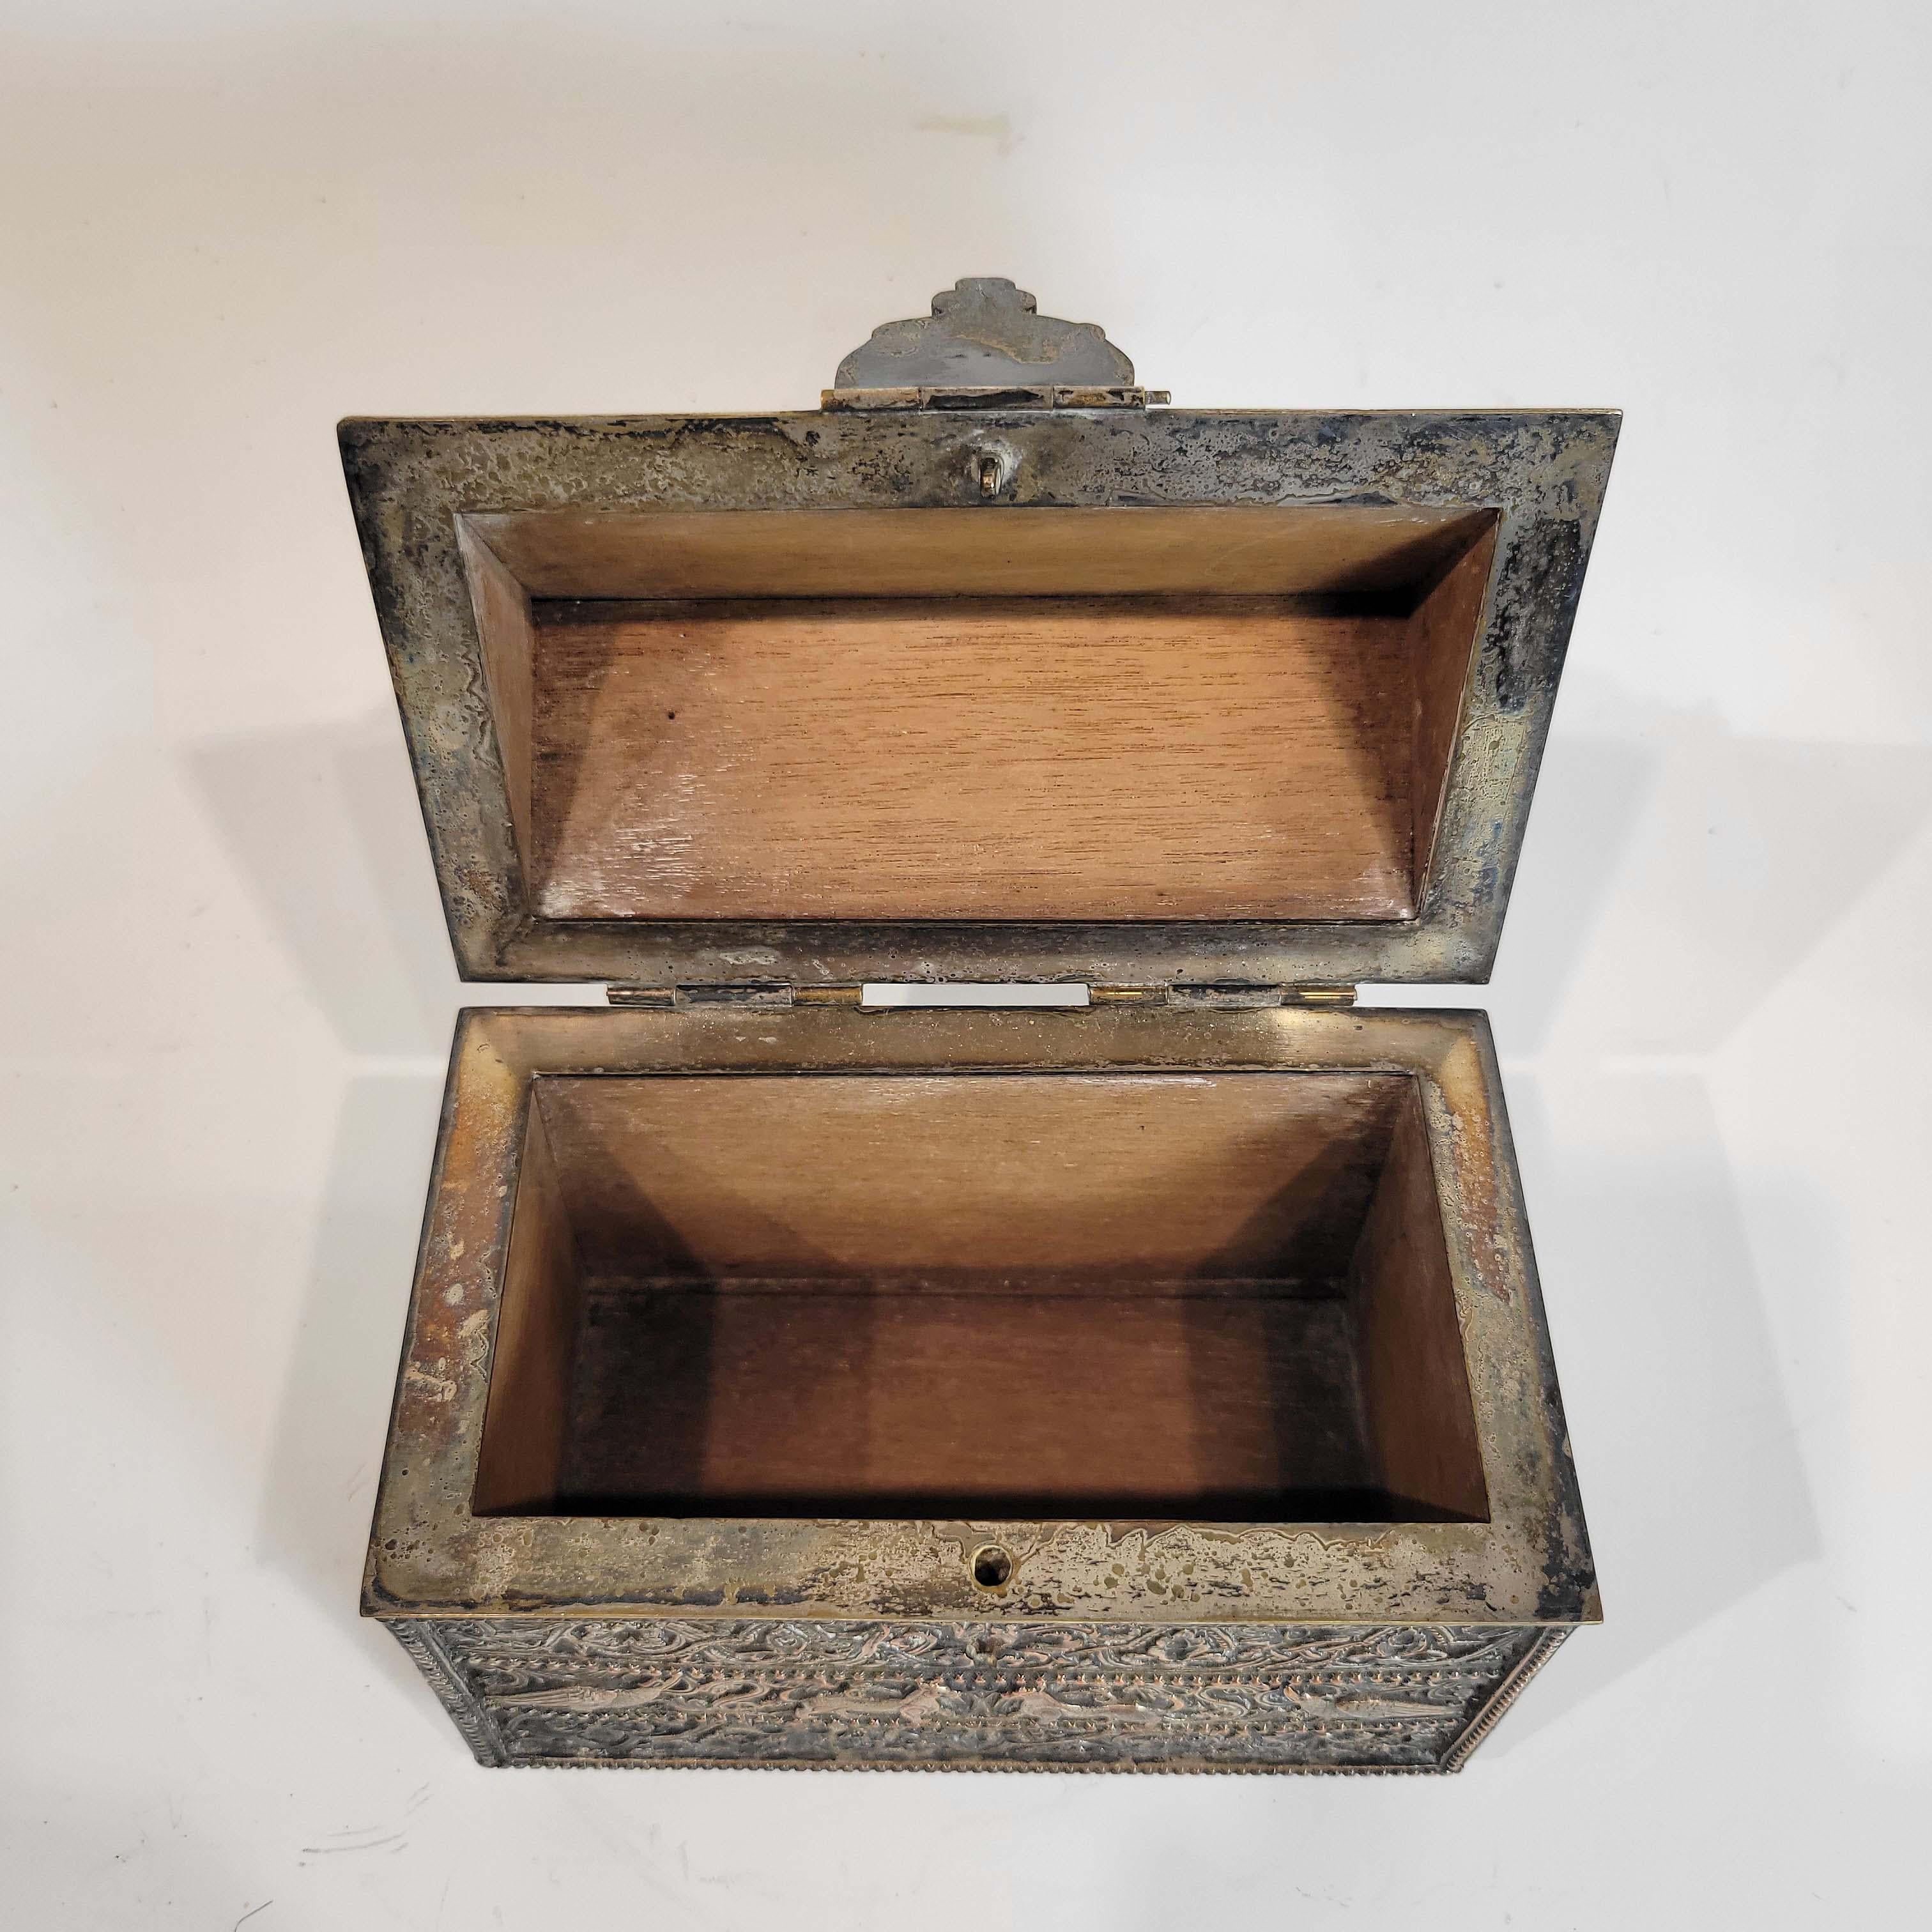 French Gothic Revival Cigar Box Casket 19C. 2